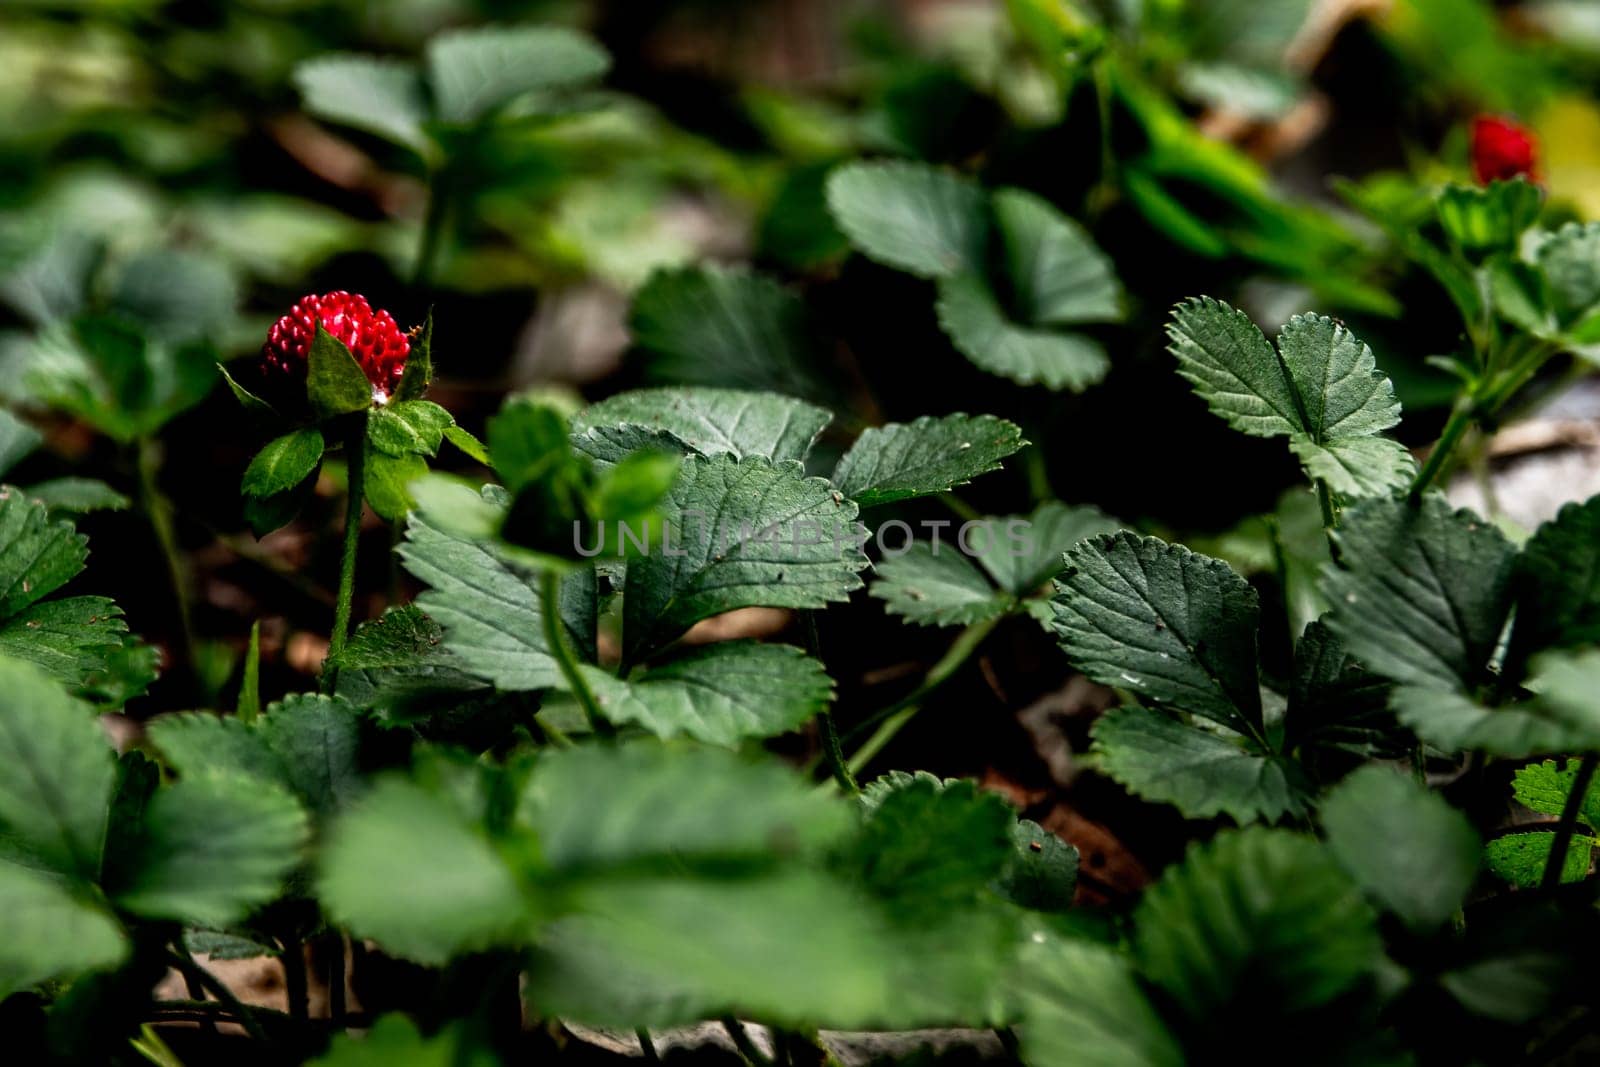 The backyard Strawberry plant for ground cover in the garden